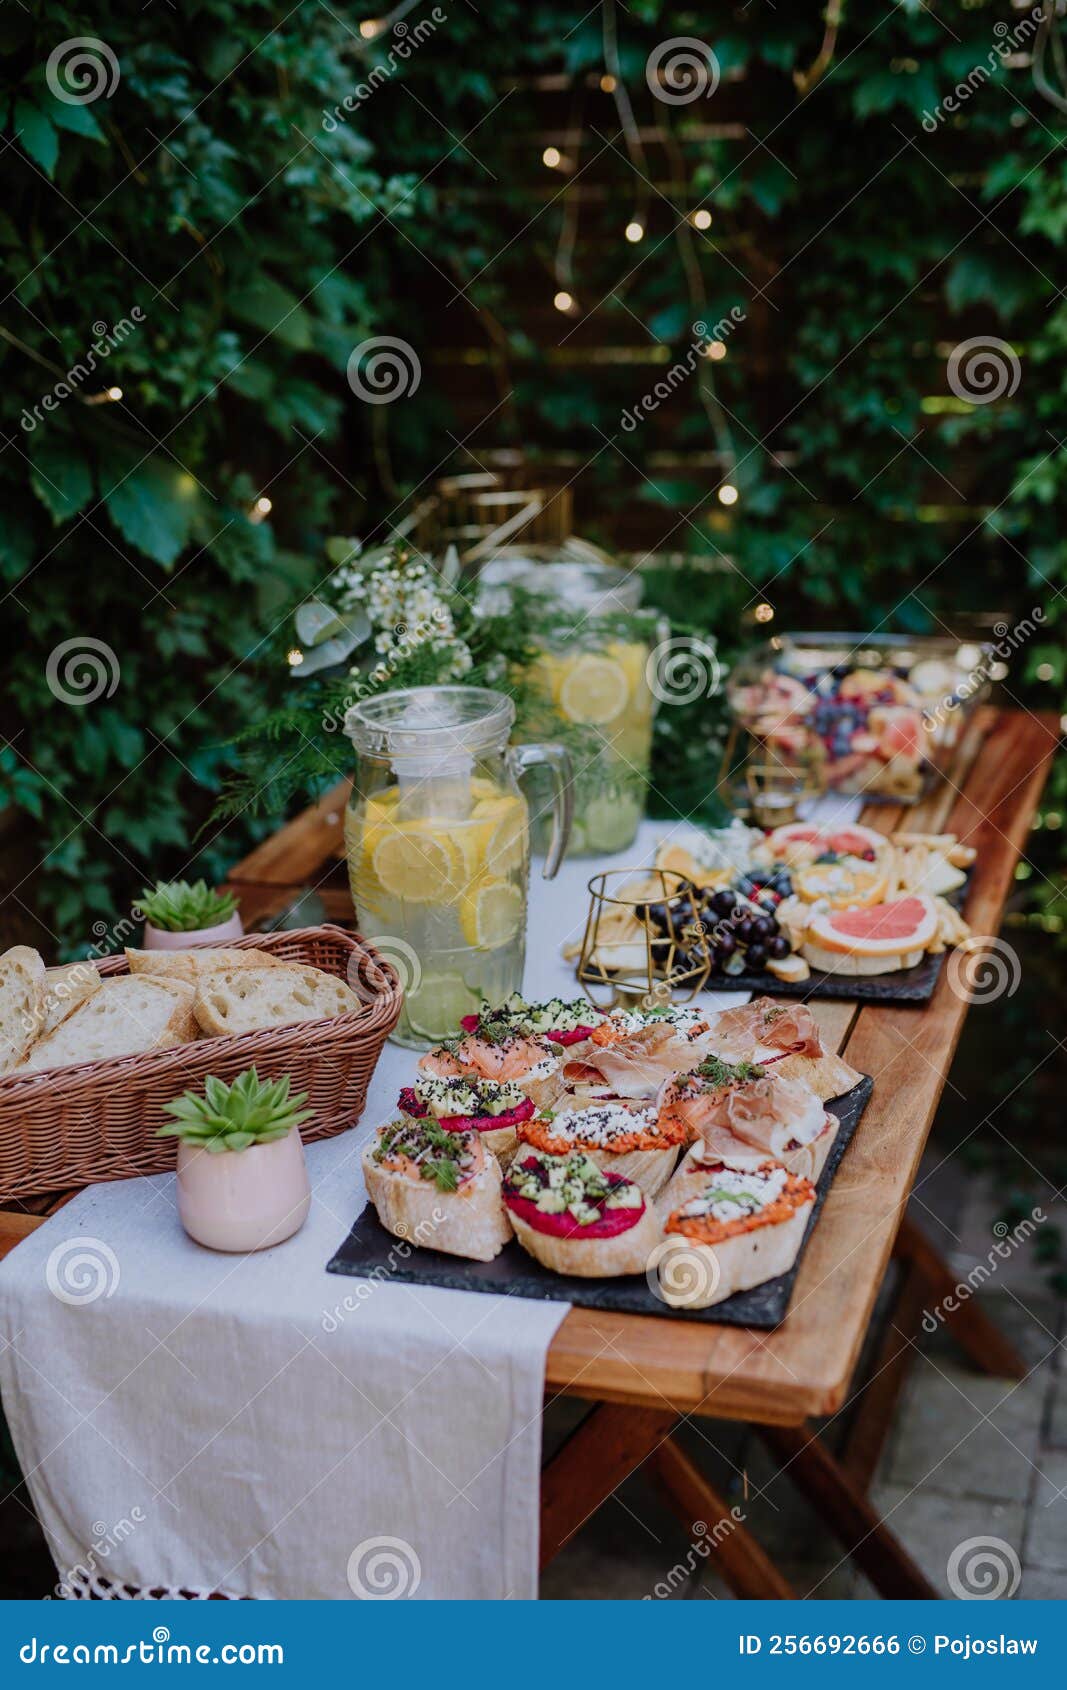 dessert buffet at small wedding reception outside in the backyard.